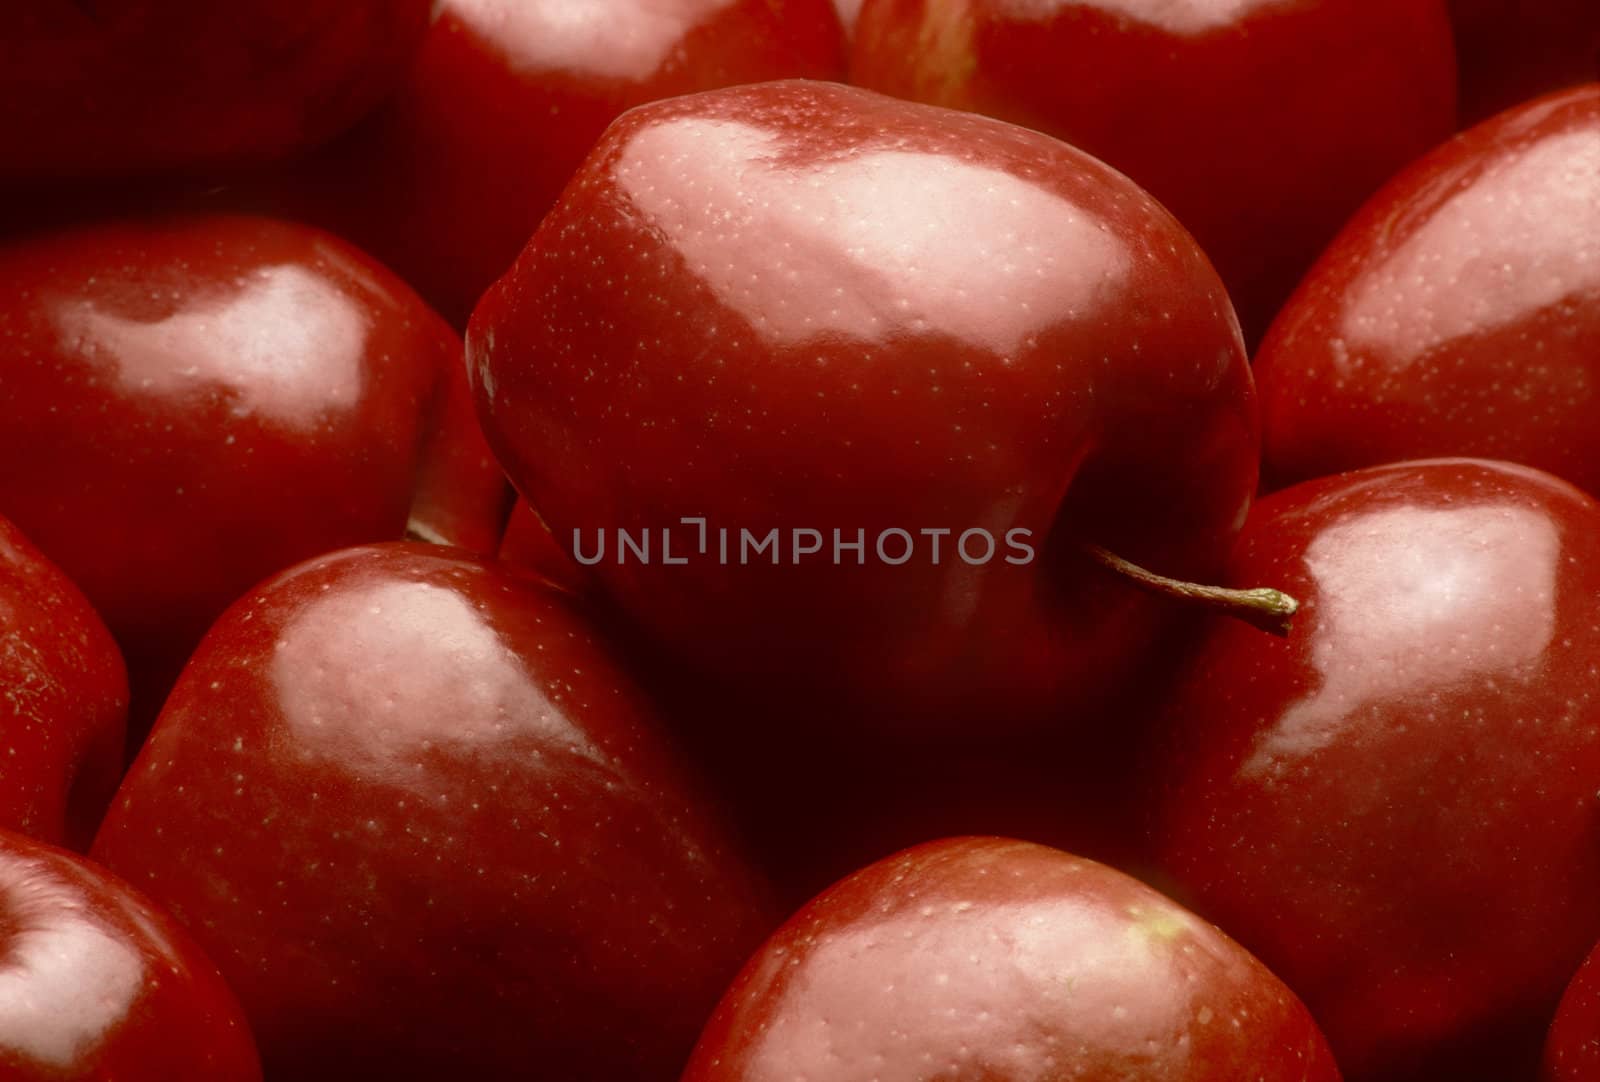 Close-up of a pile of shiny Red Delicious apples